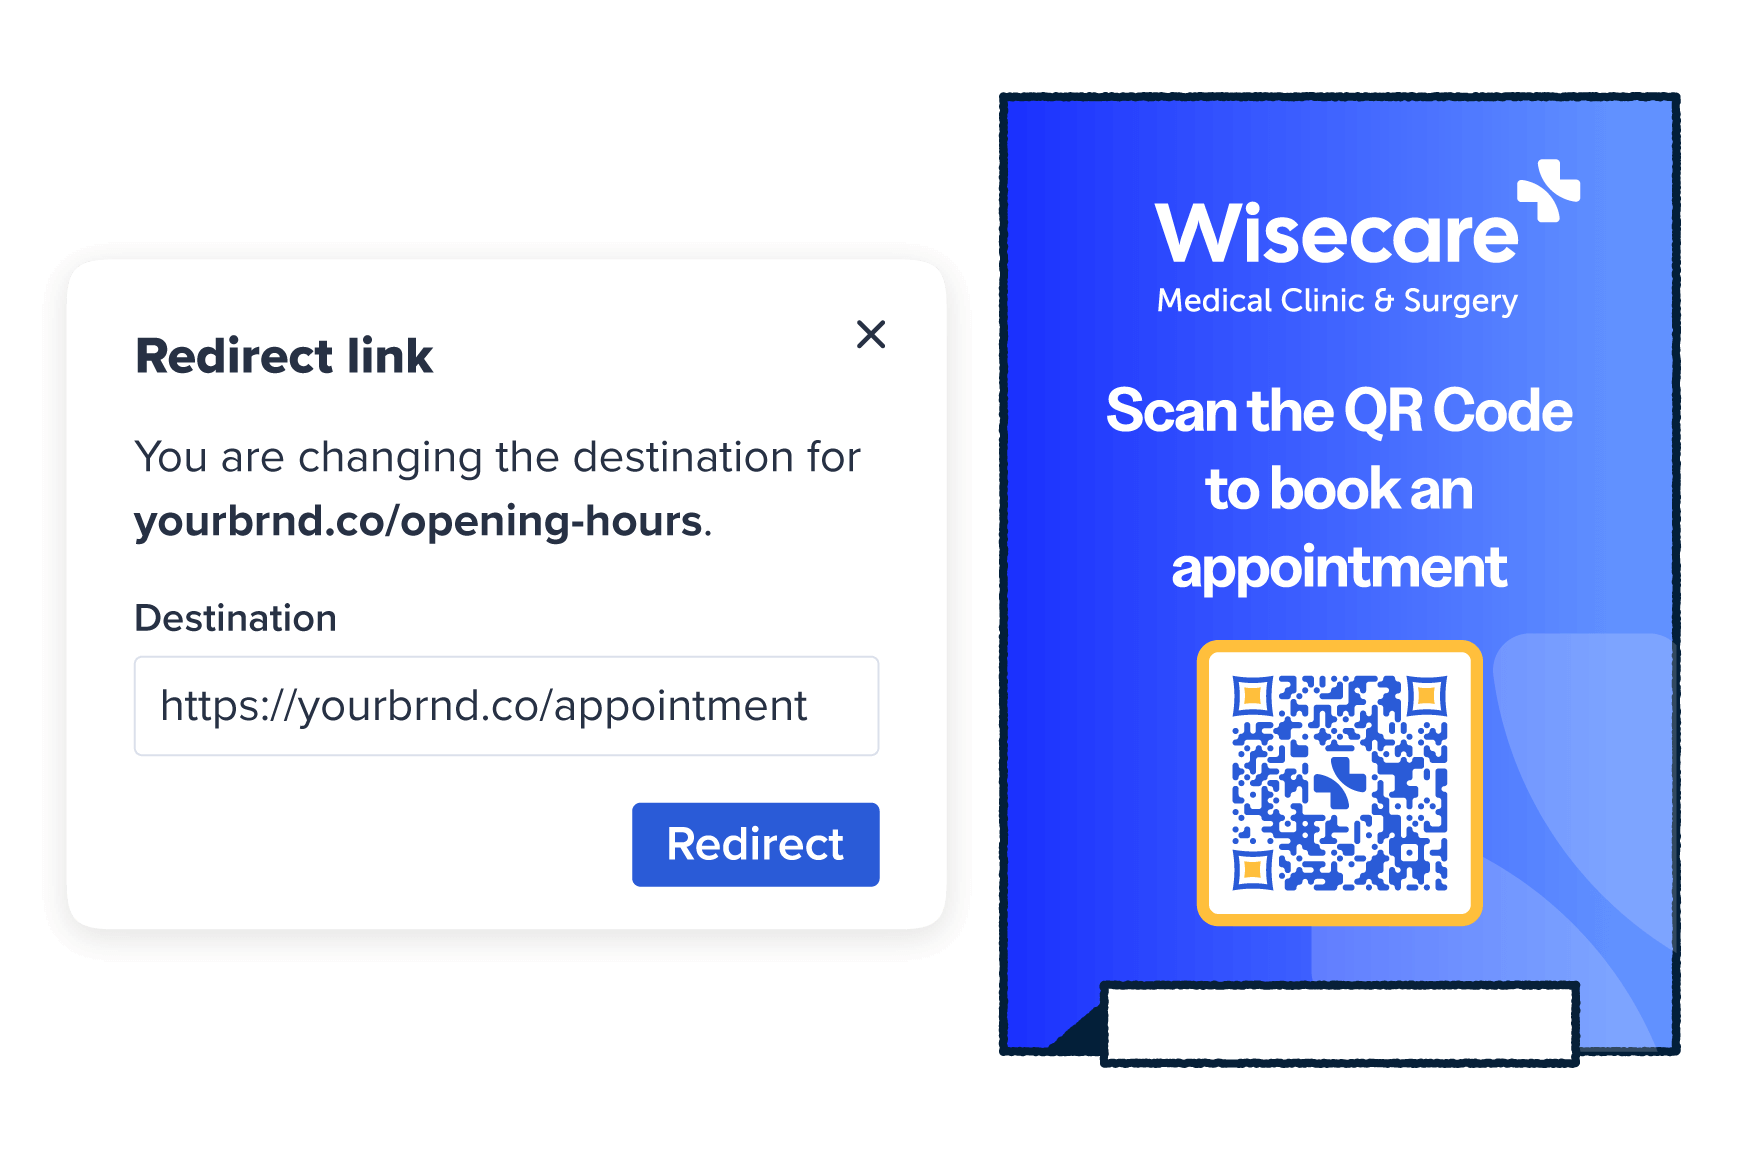 Redirect link to make a medical appointment